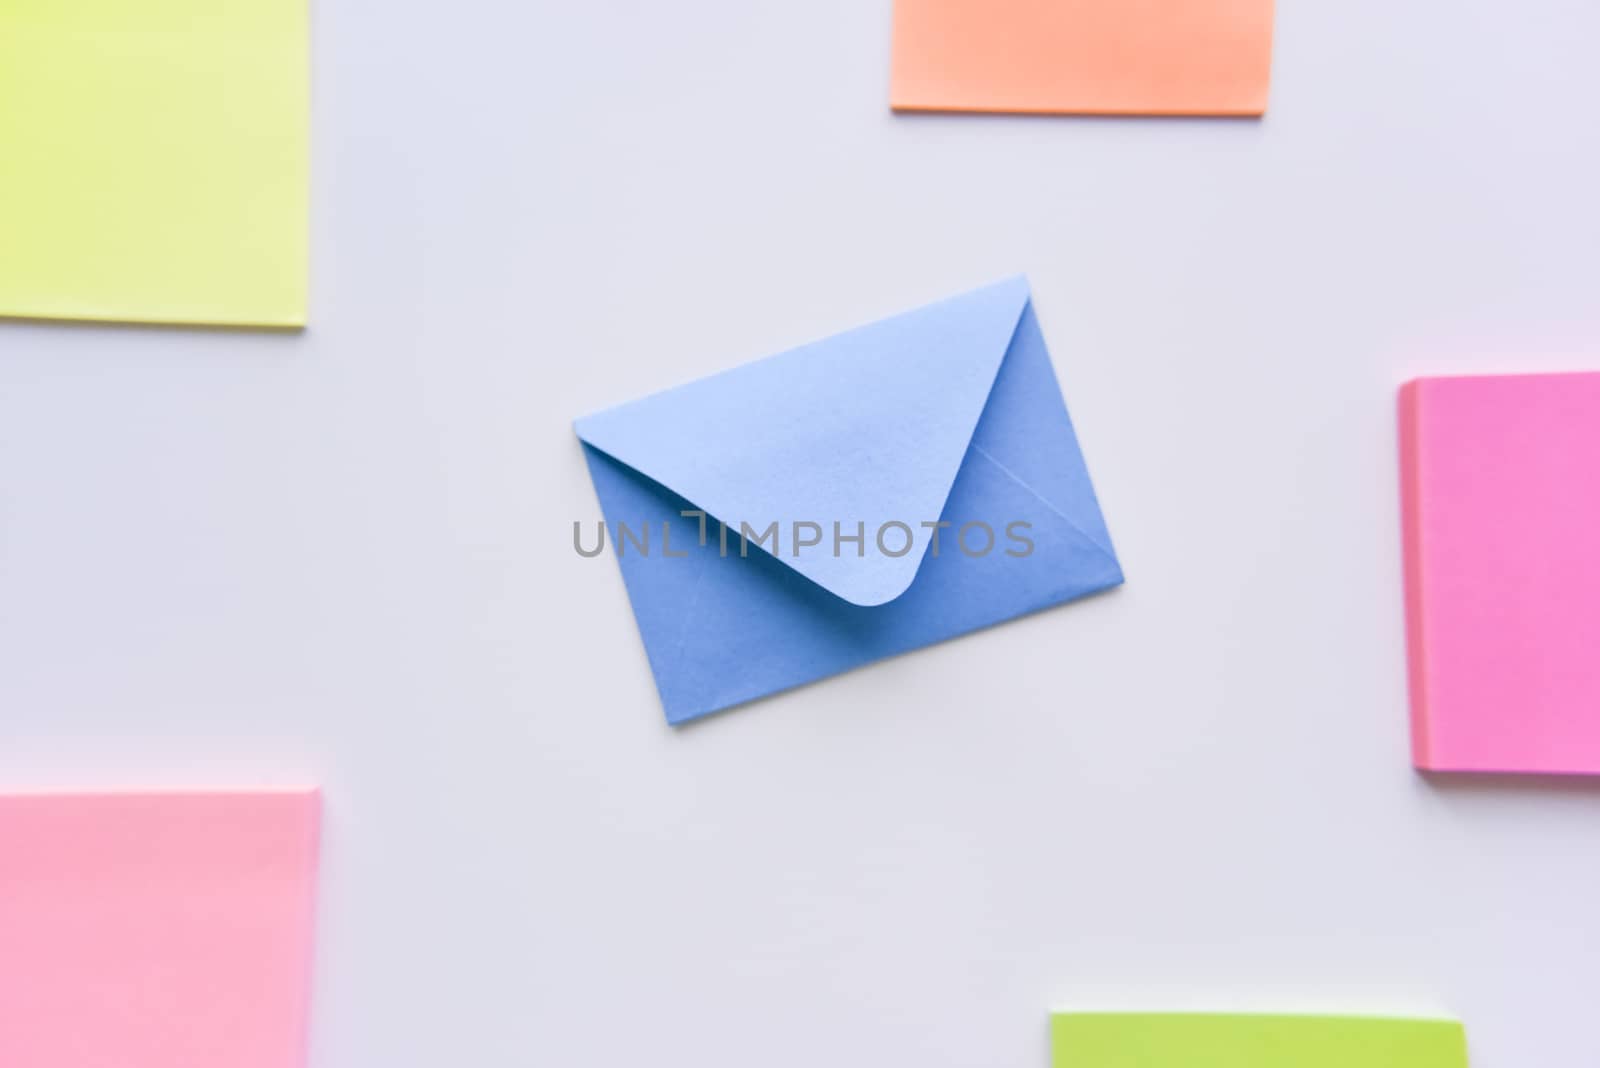 selective focus, blue envelope in the center with bright colored rectangles on sides